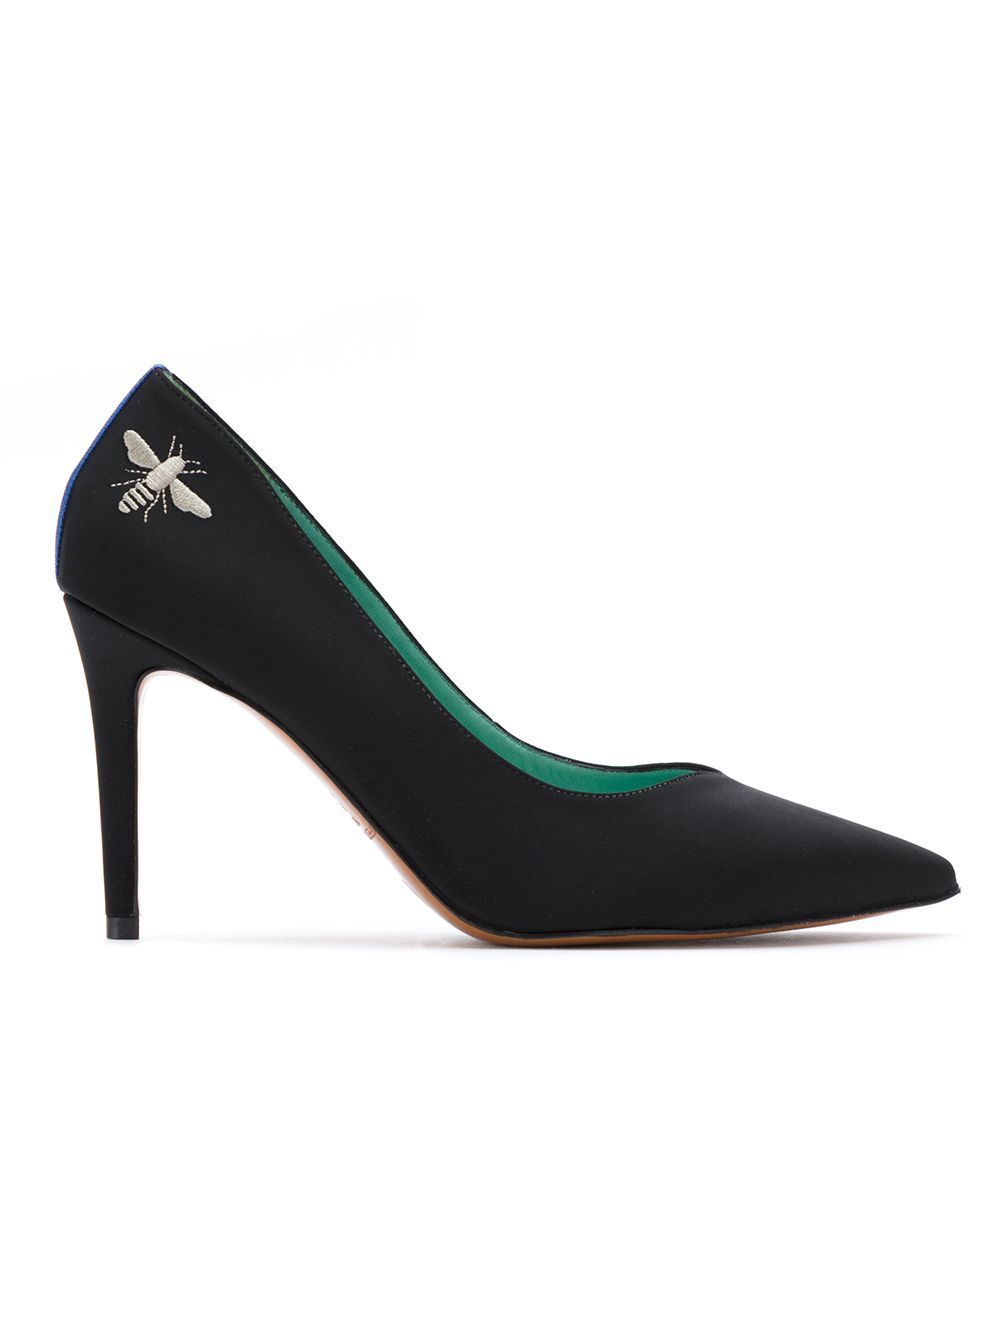 Blue Bird Shoes embroidered pumps - Black | FarFetch Global